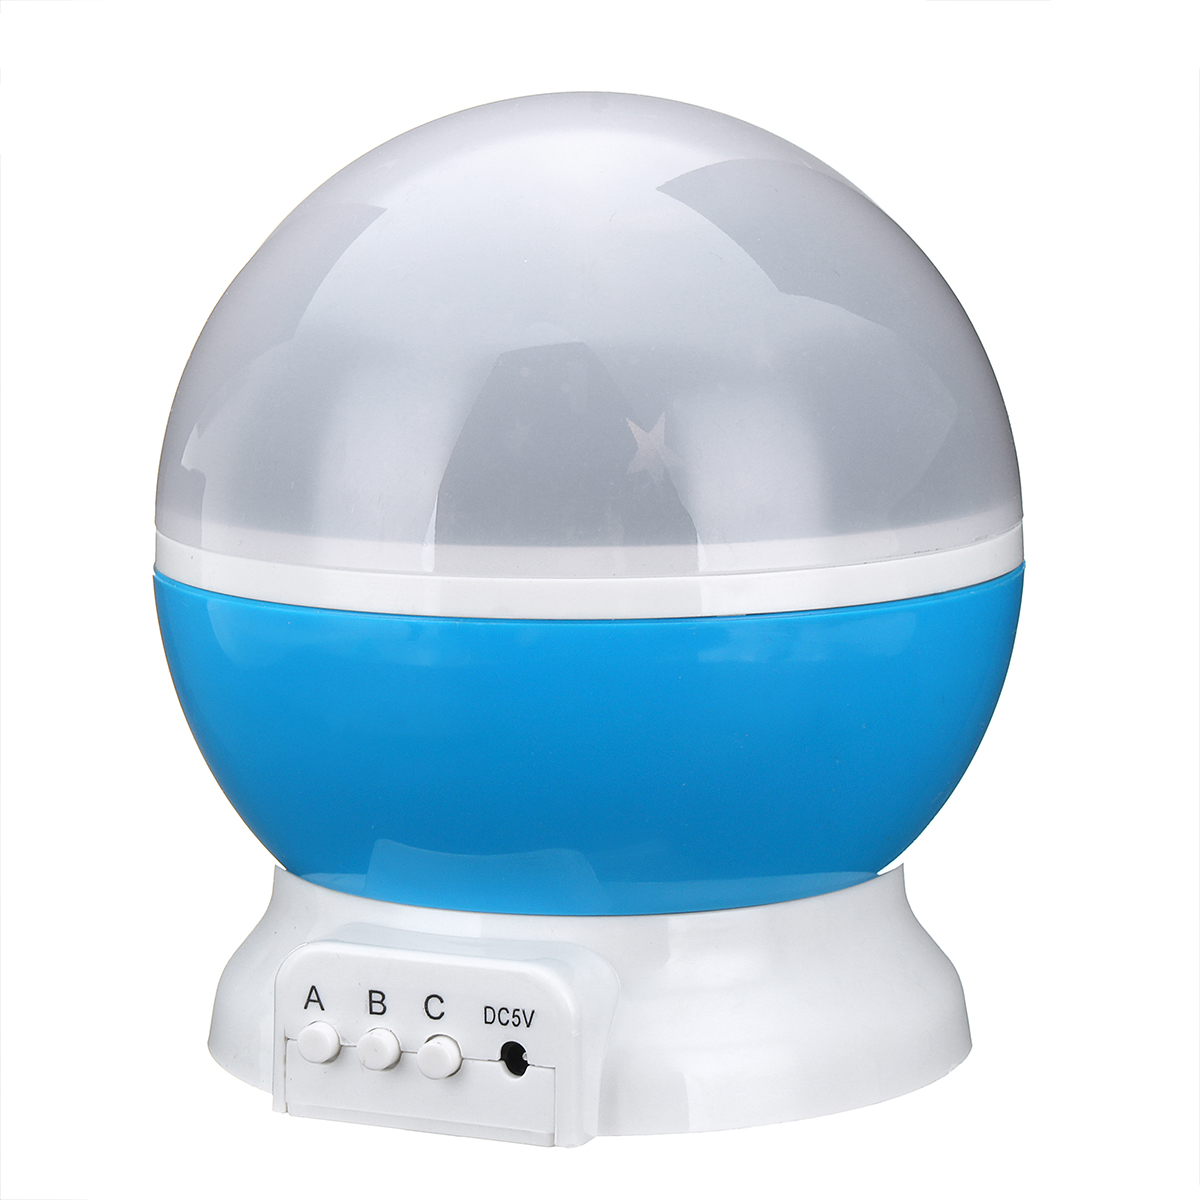 LED-Starry-Projector-Lamp-Baby-Night-Light-USB-Romantic-Rotating-Moon-Cosmos-Sky-Star-Projection-Lam-1937902-12